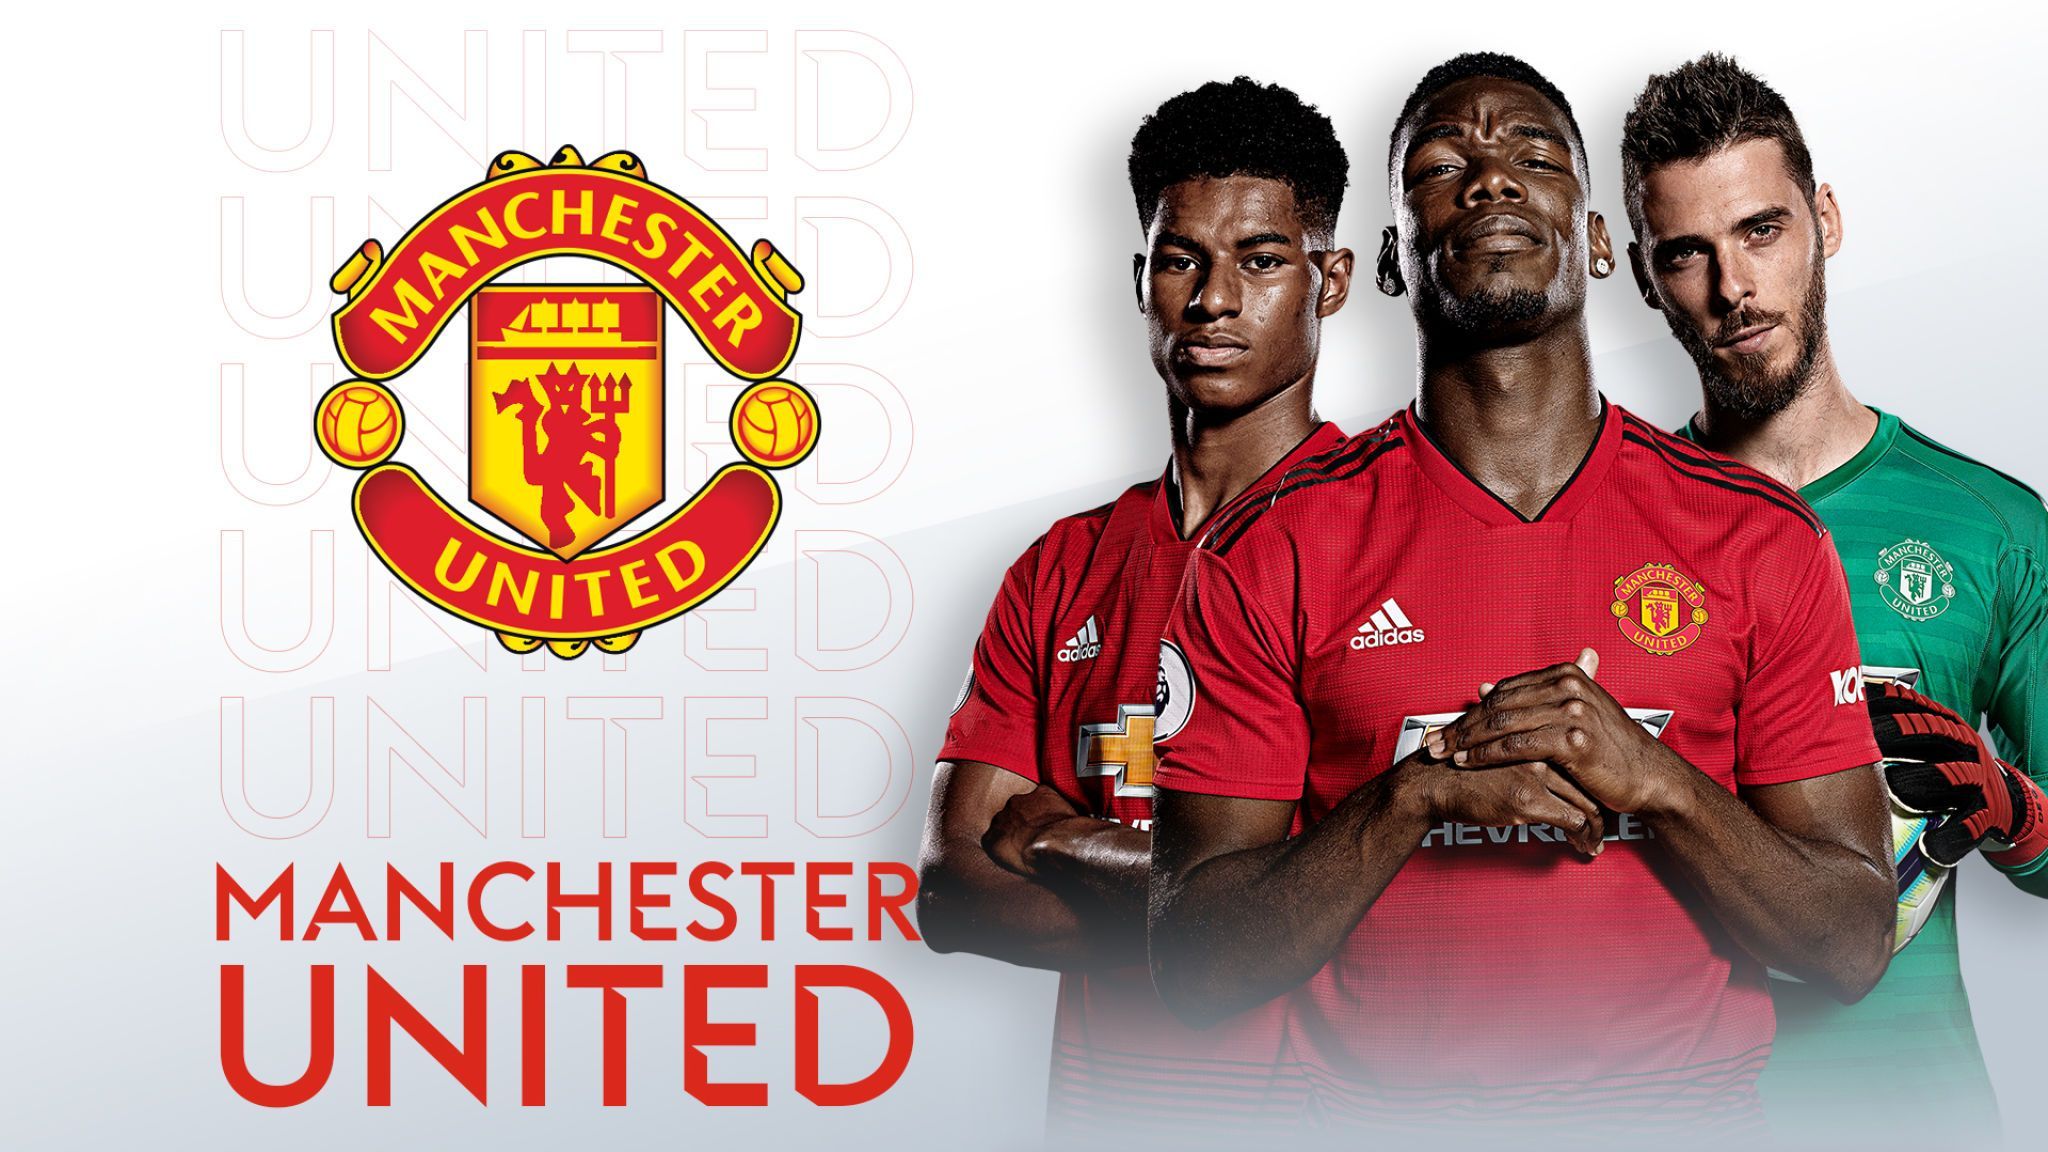 Free Download Man Utd Fixtures Premier League 201920 Football News Sky Sports [2048x1152] For Your Desktop, Mobile & Tablet. Explore IPhone Jersey Third Manchester United 2019 2020 Wallpaper